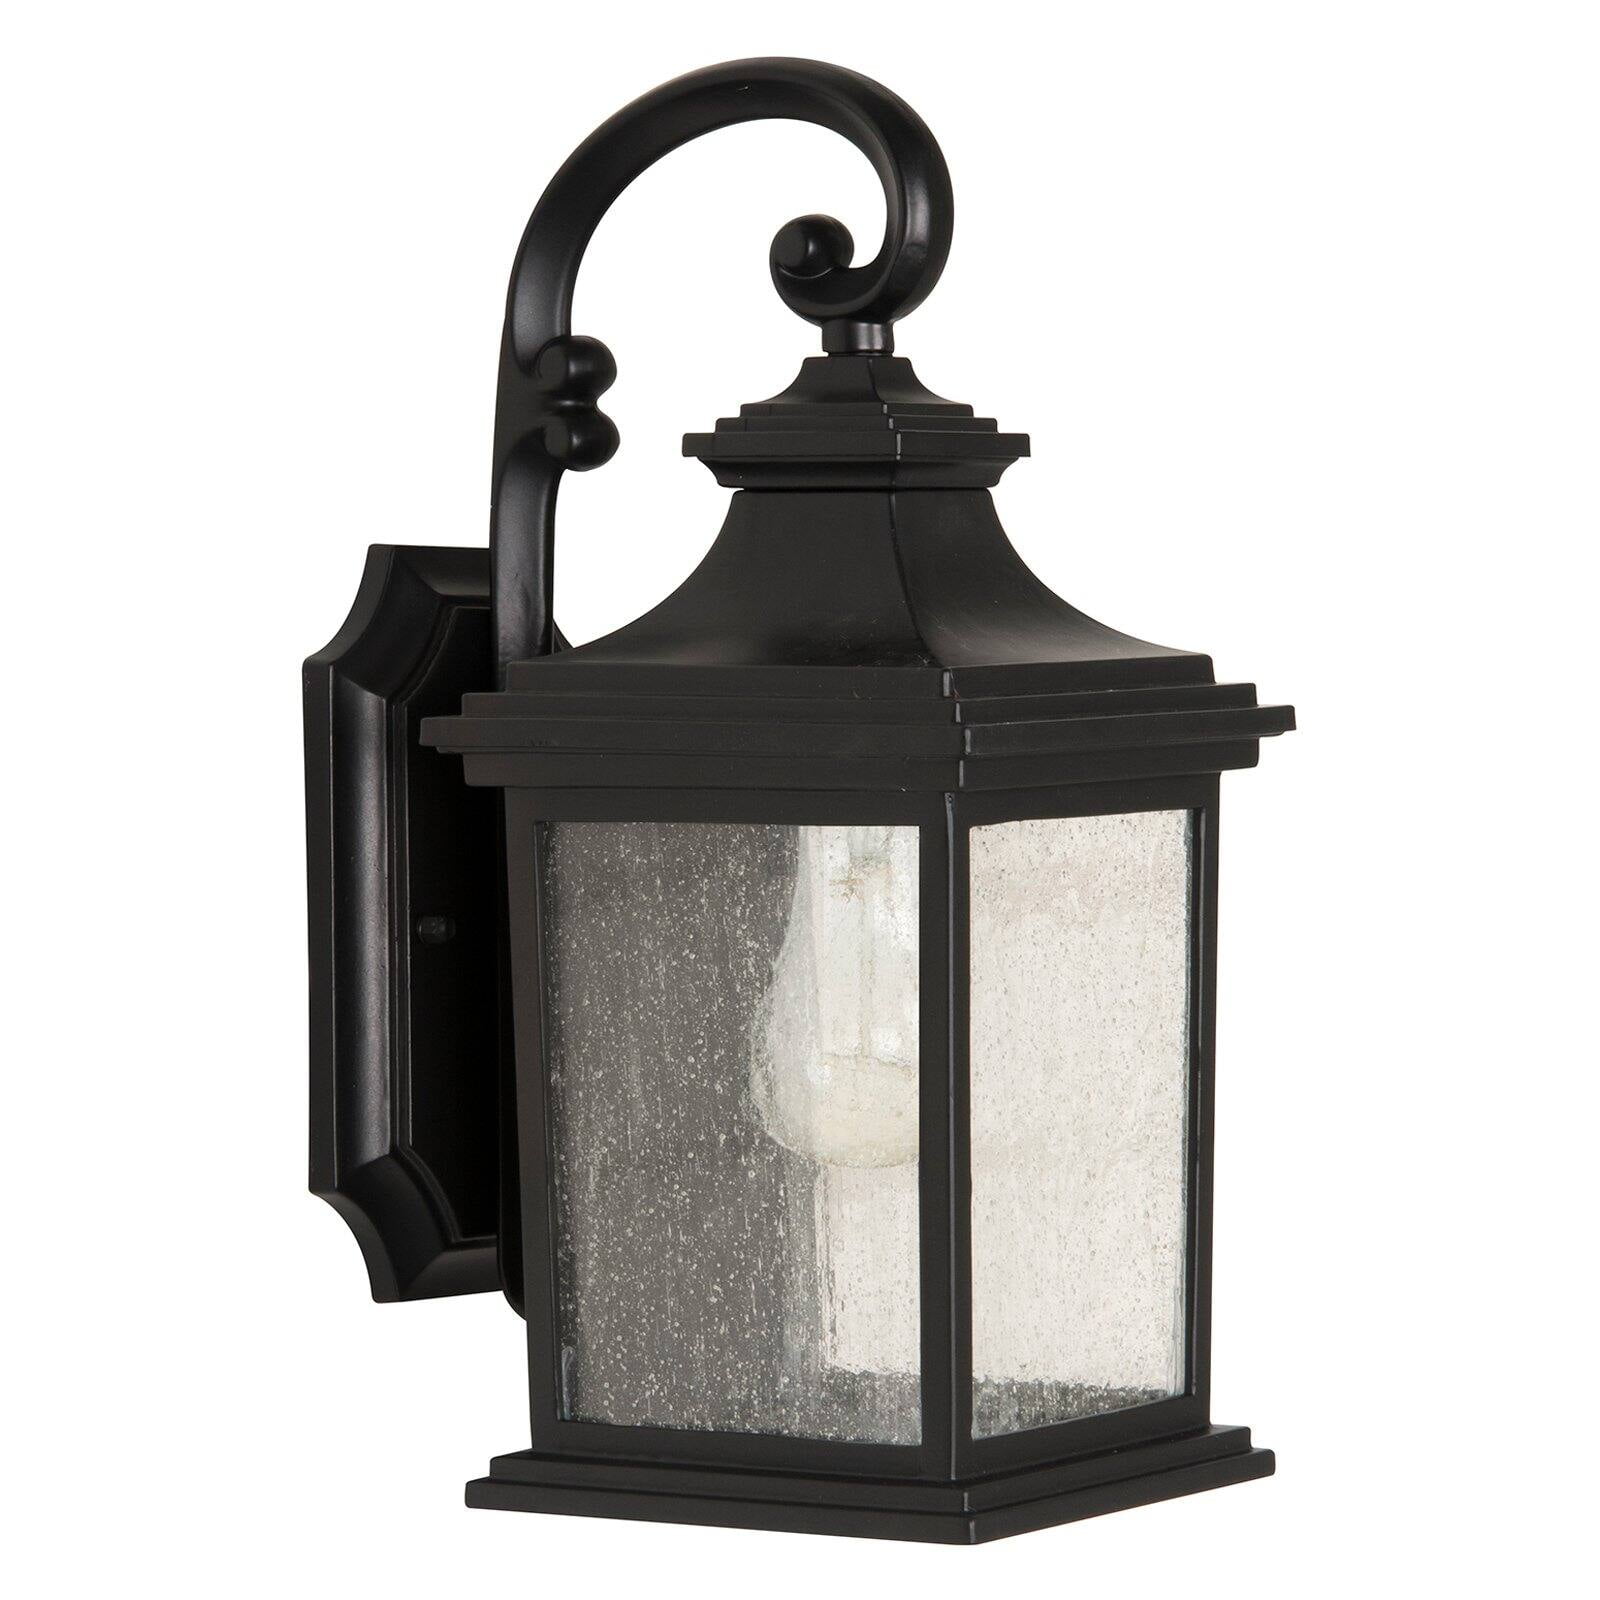 Craftmade Gentry Z3204 Small Outdoor, Small Outdoor Wall Mount Light Fixtures